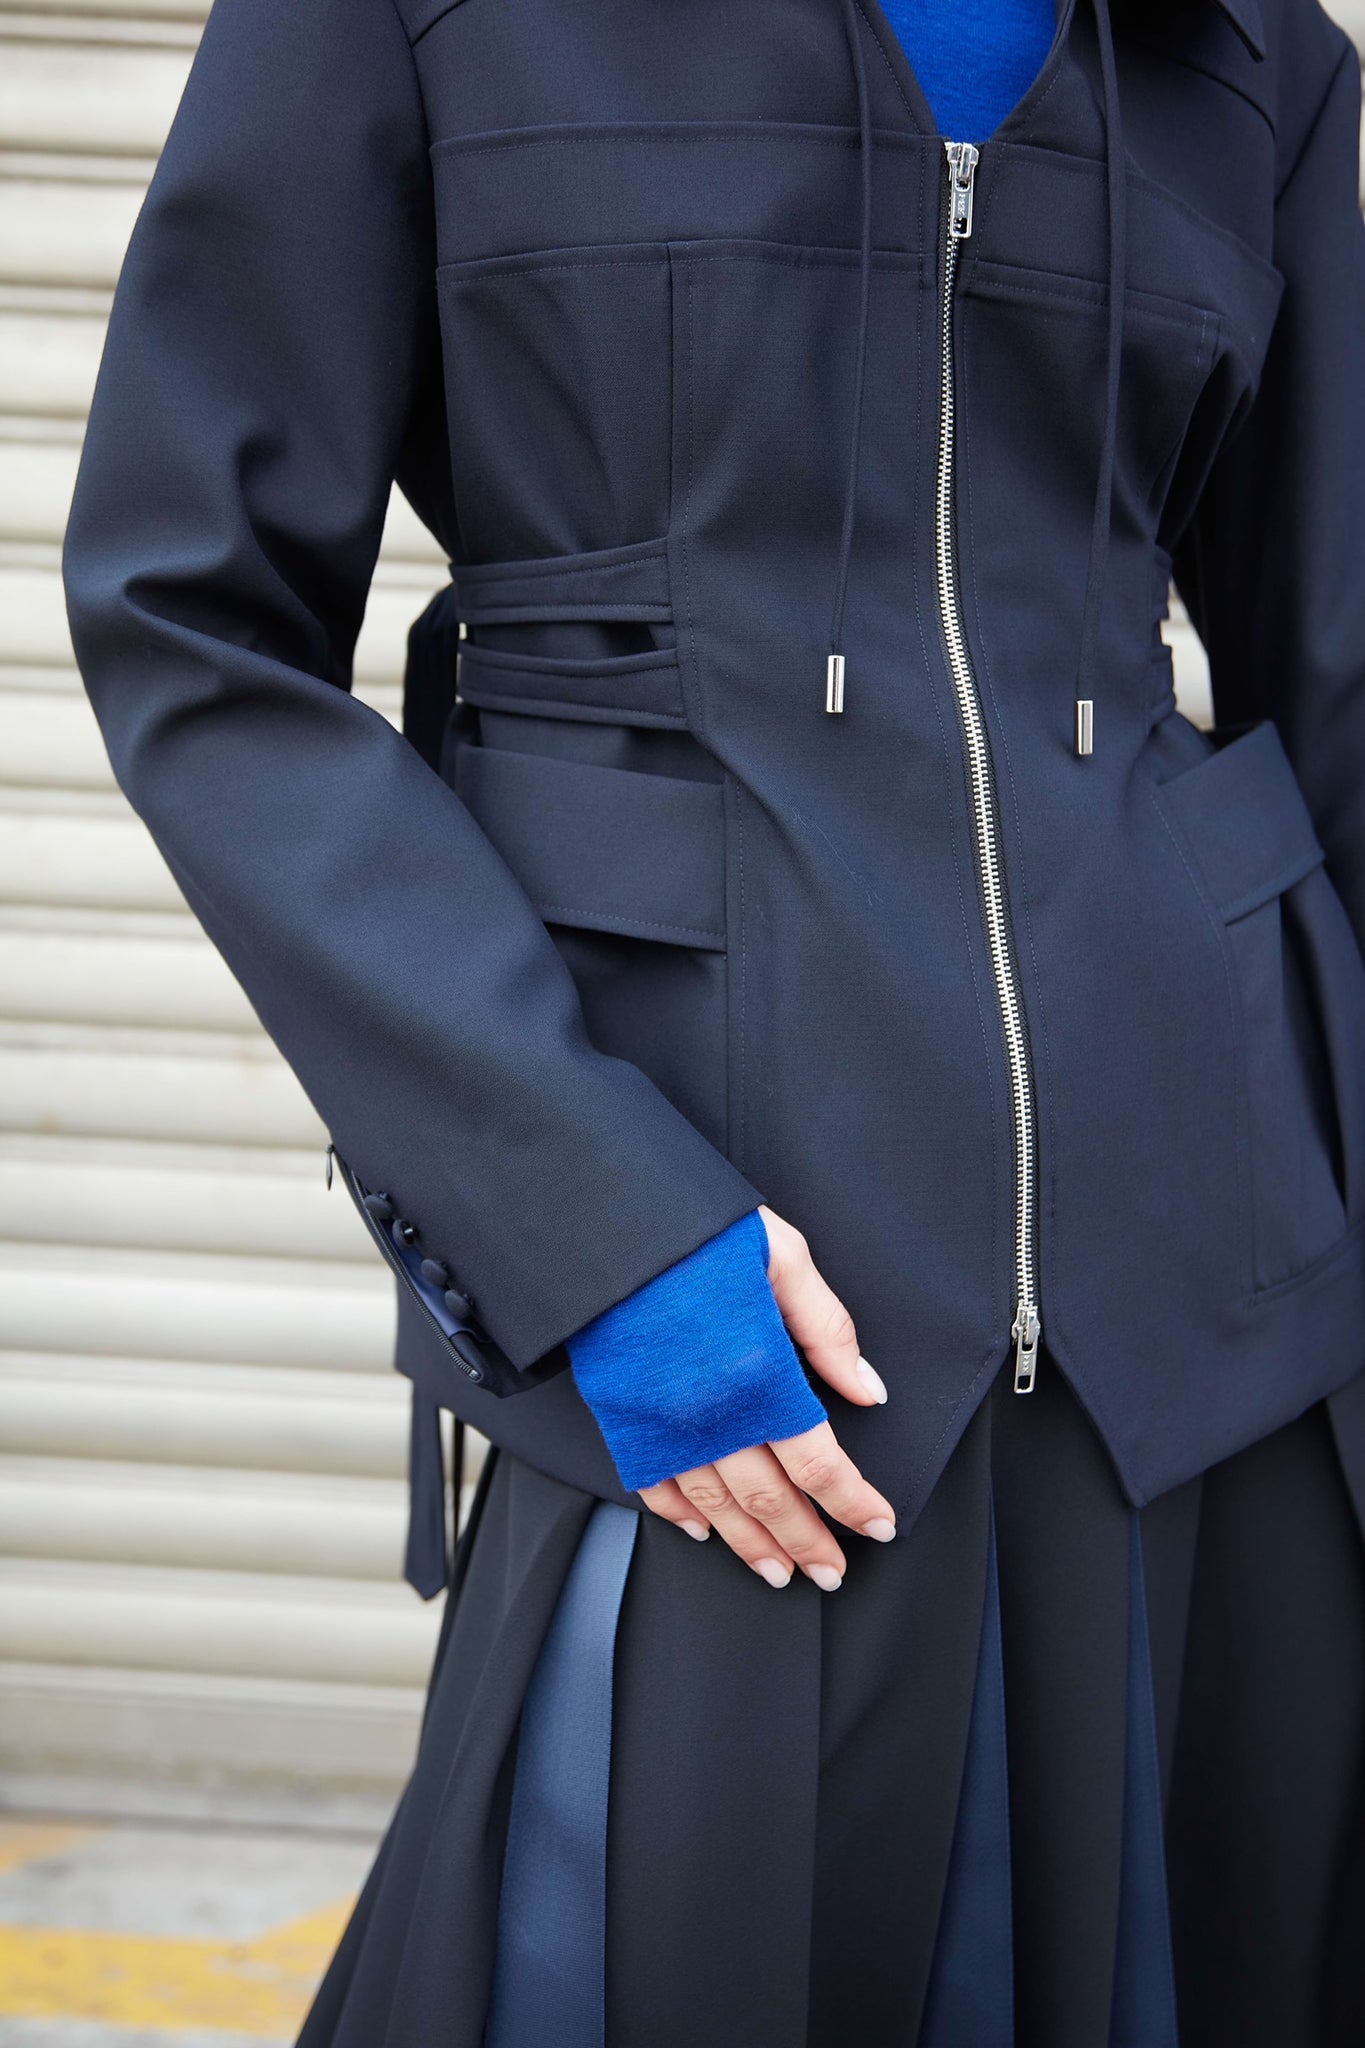 Structural Wool Jacket Navy